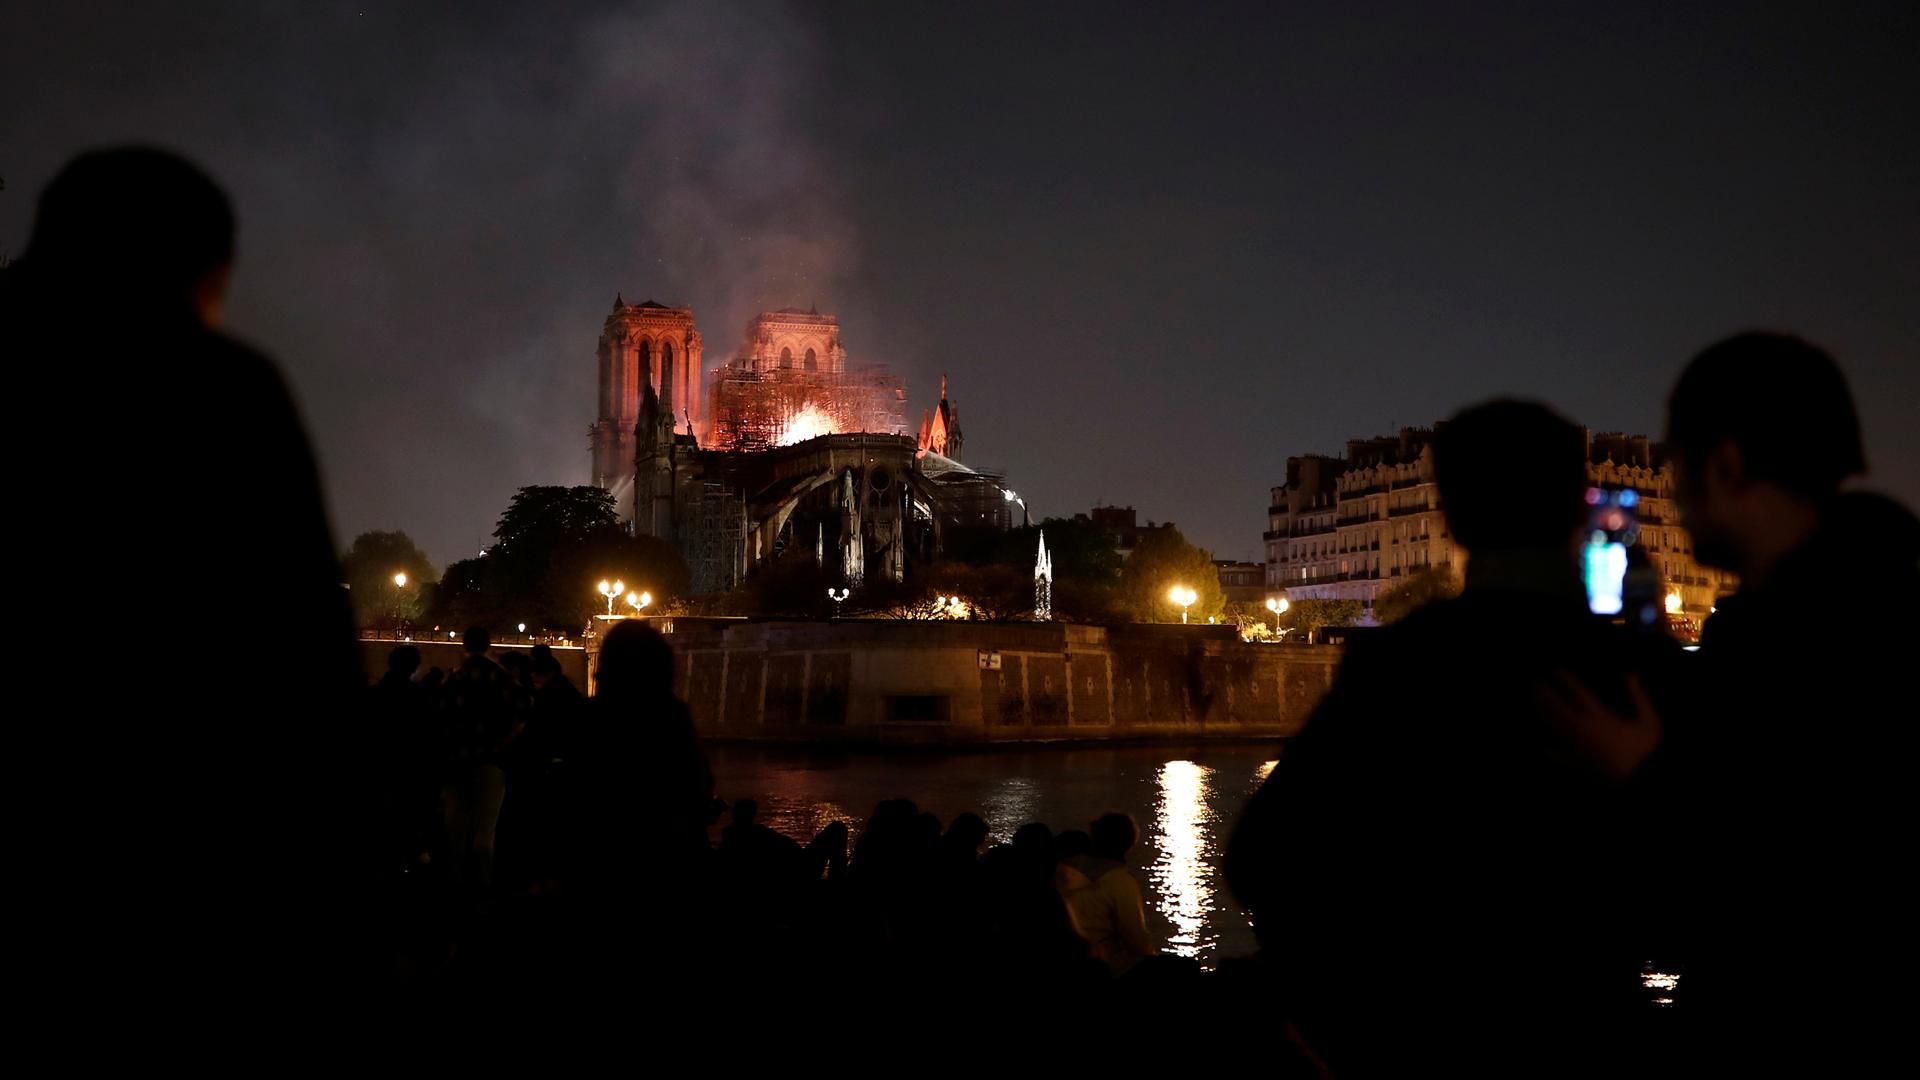 in the distance, the Notre Dame burns